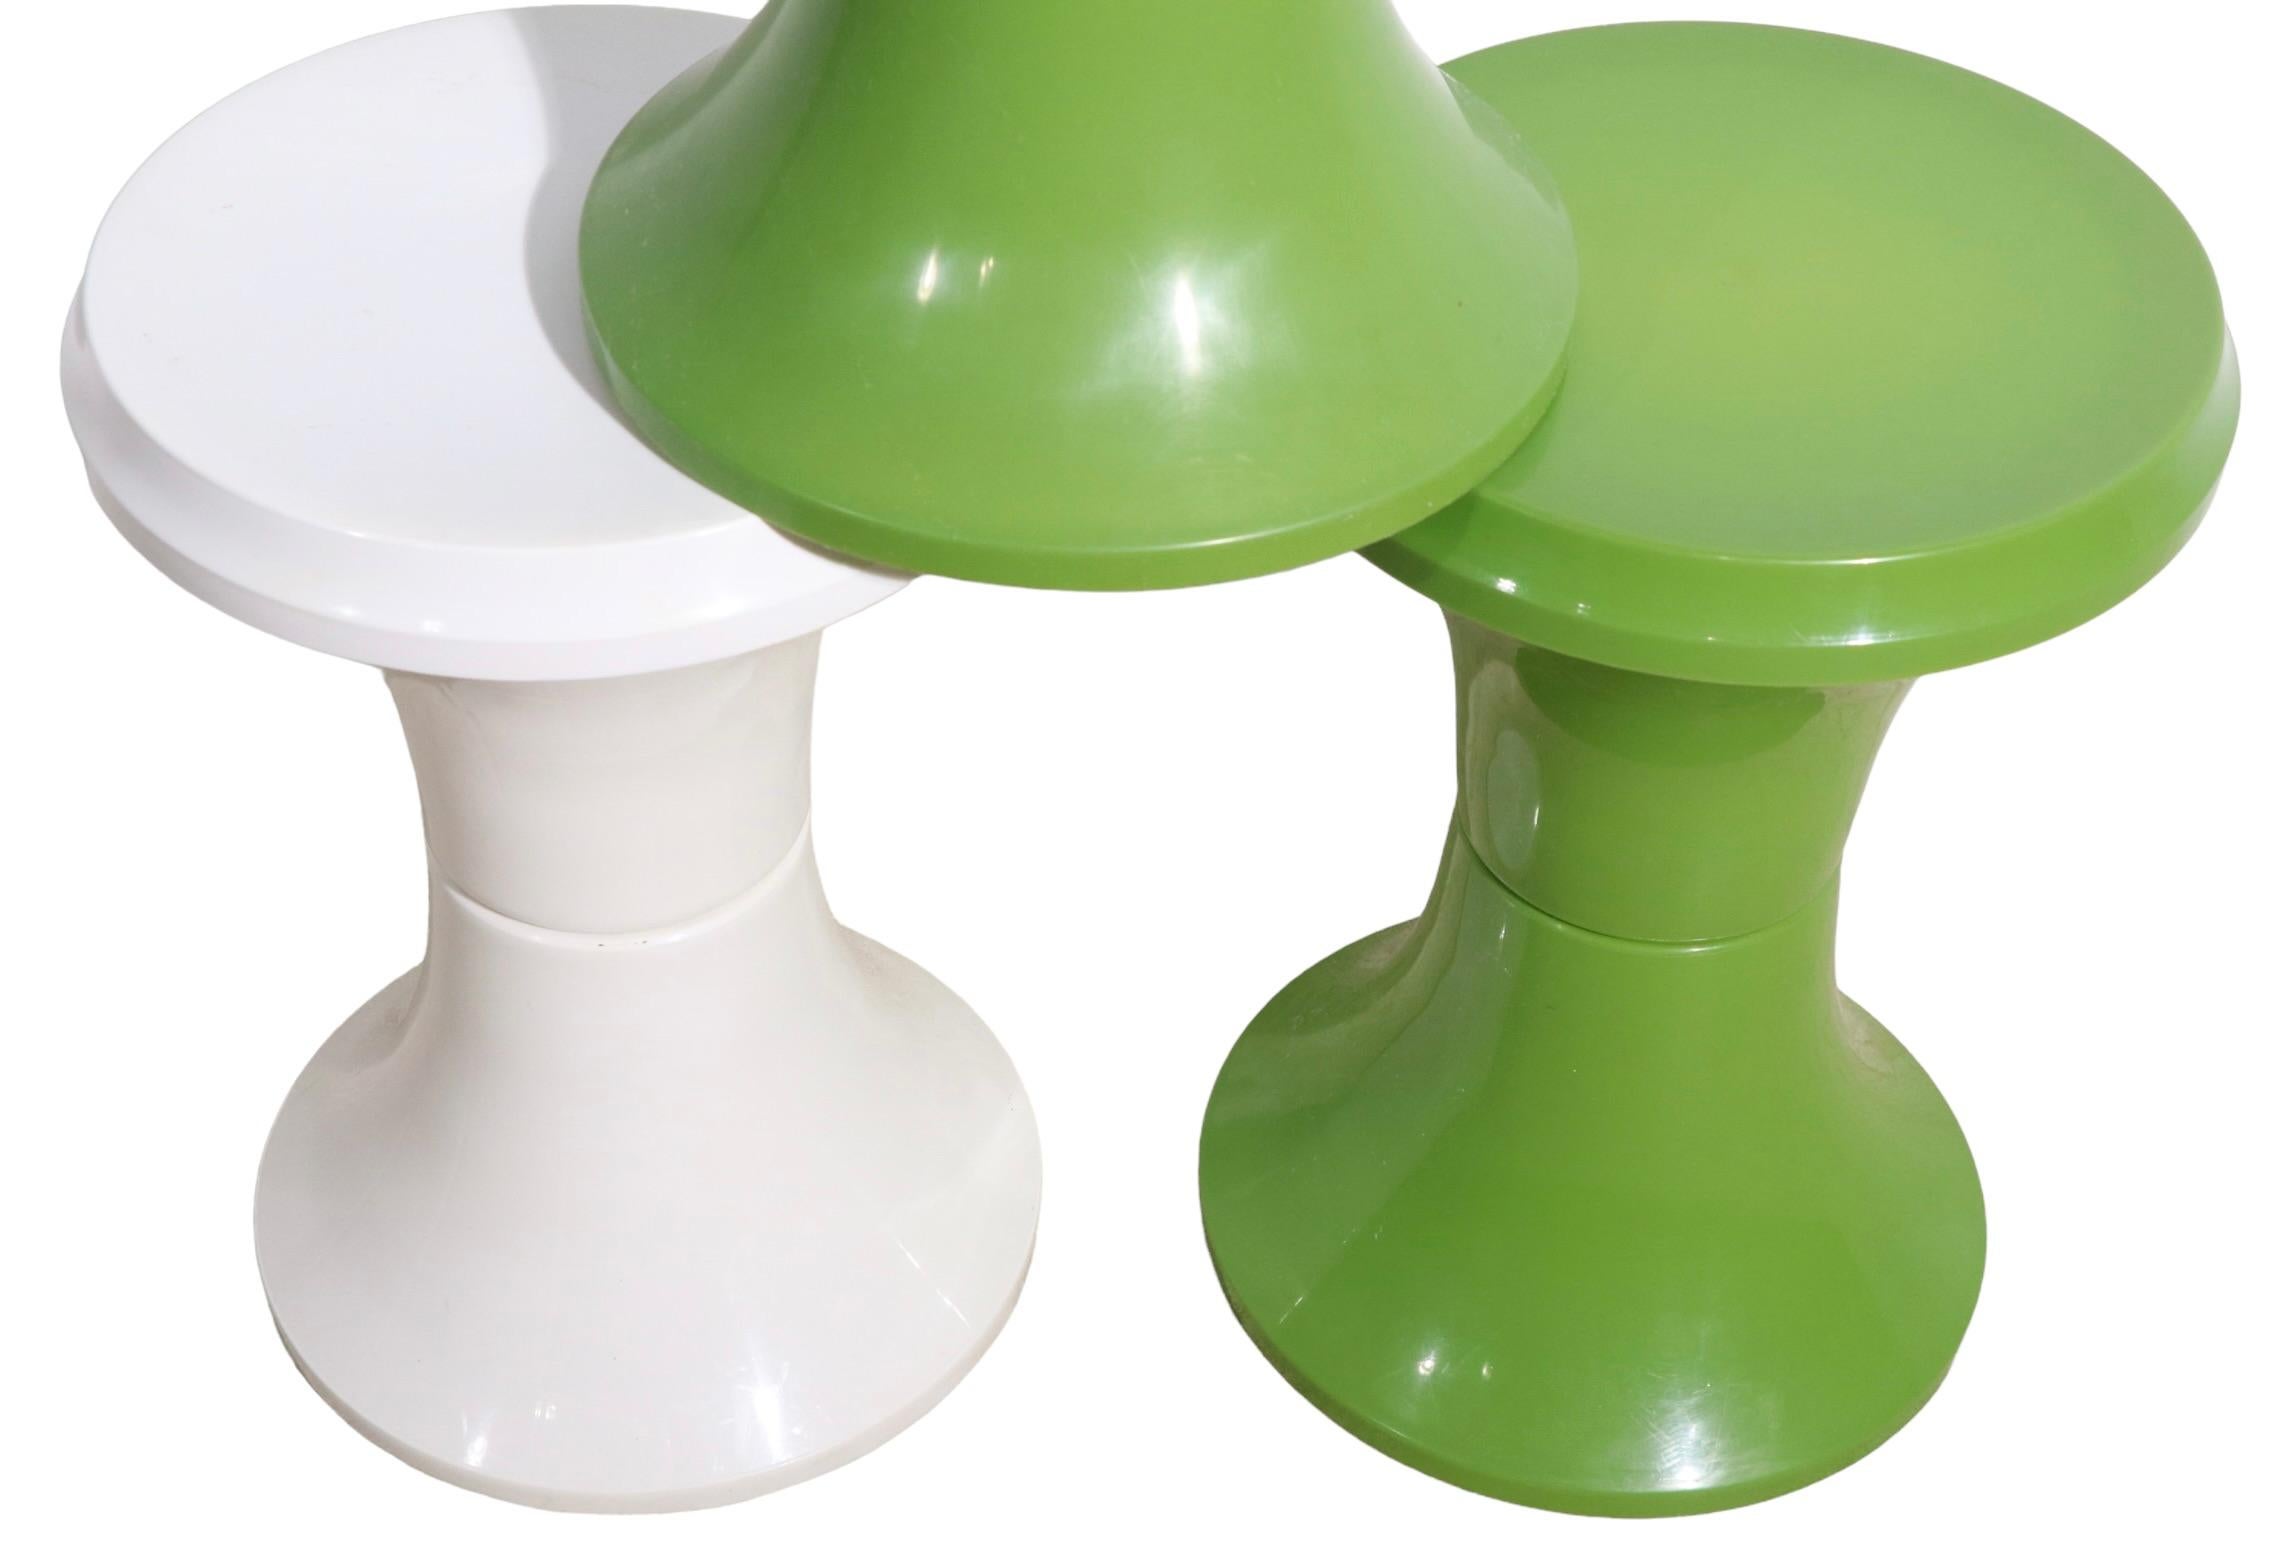 Cool set of three plastic pedestal, end, side table, stools. The set consists of two, green, and one white table, all are in very good, original condition, clean and ready to use. Circa 1970's probably made in Italy. Offered and priced as a set of